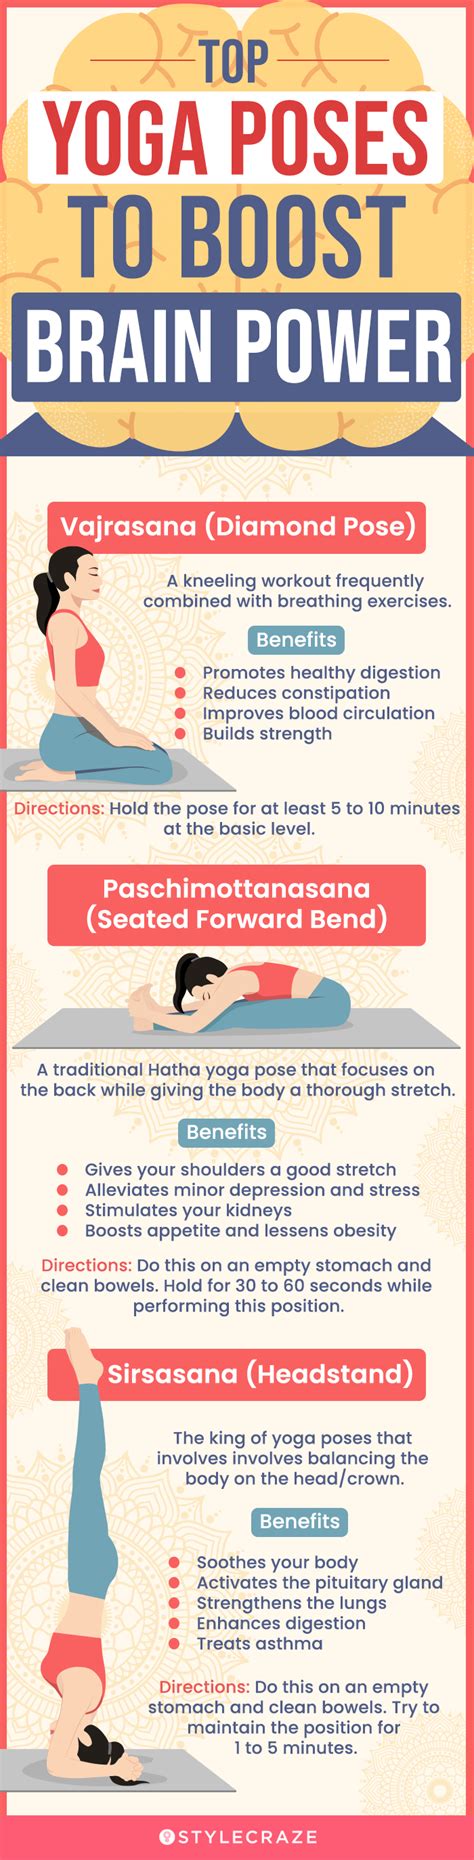 8 Effective Yoga Poses To Increase Your Brain Power